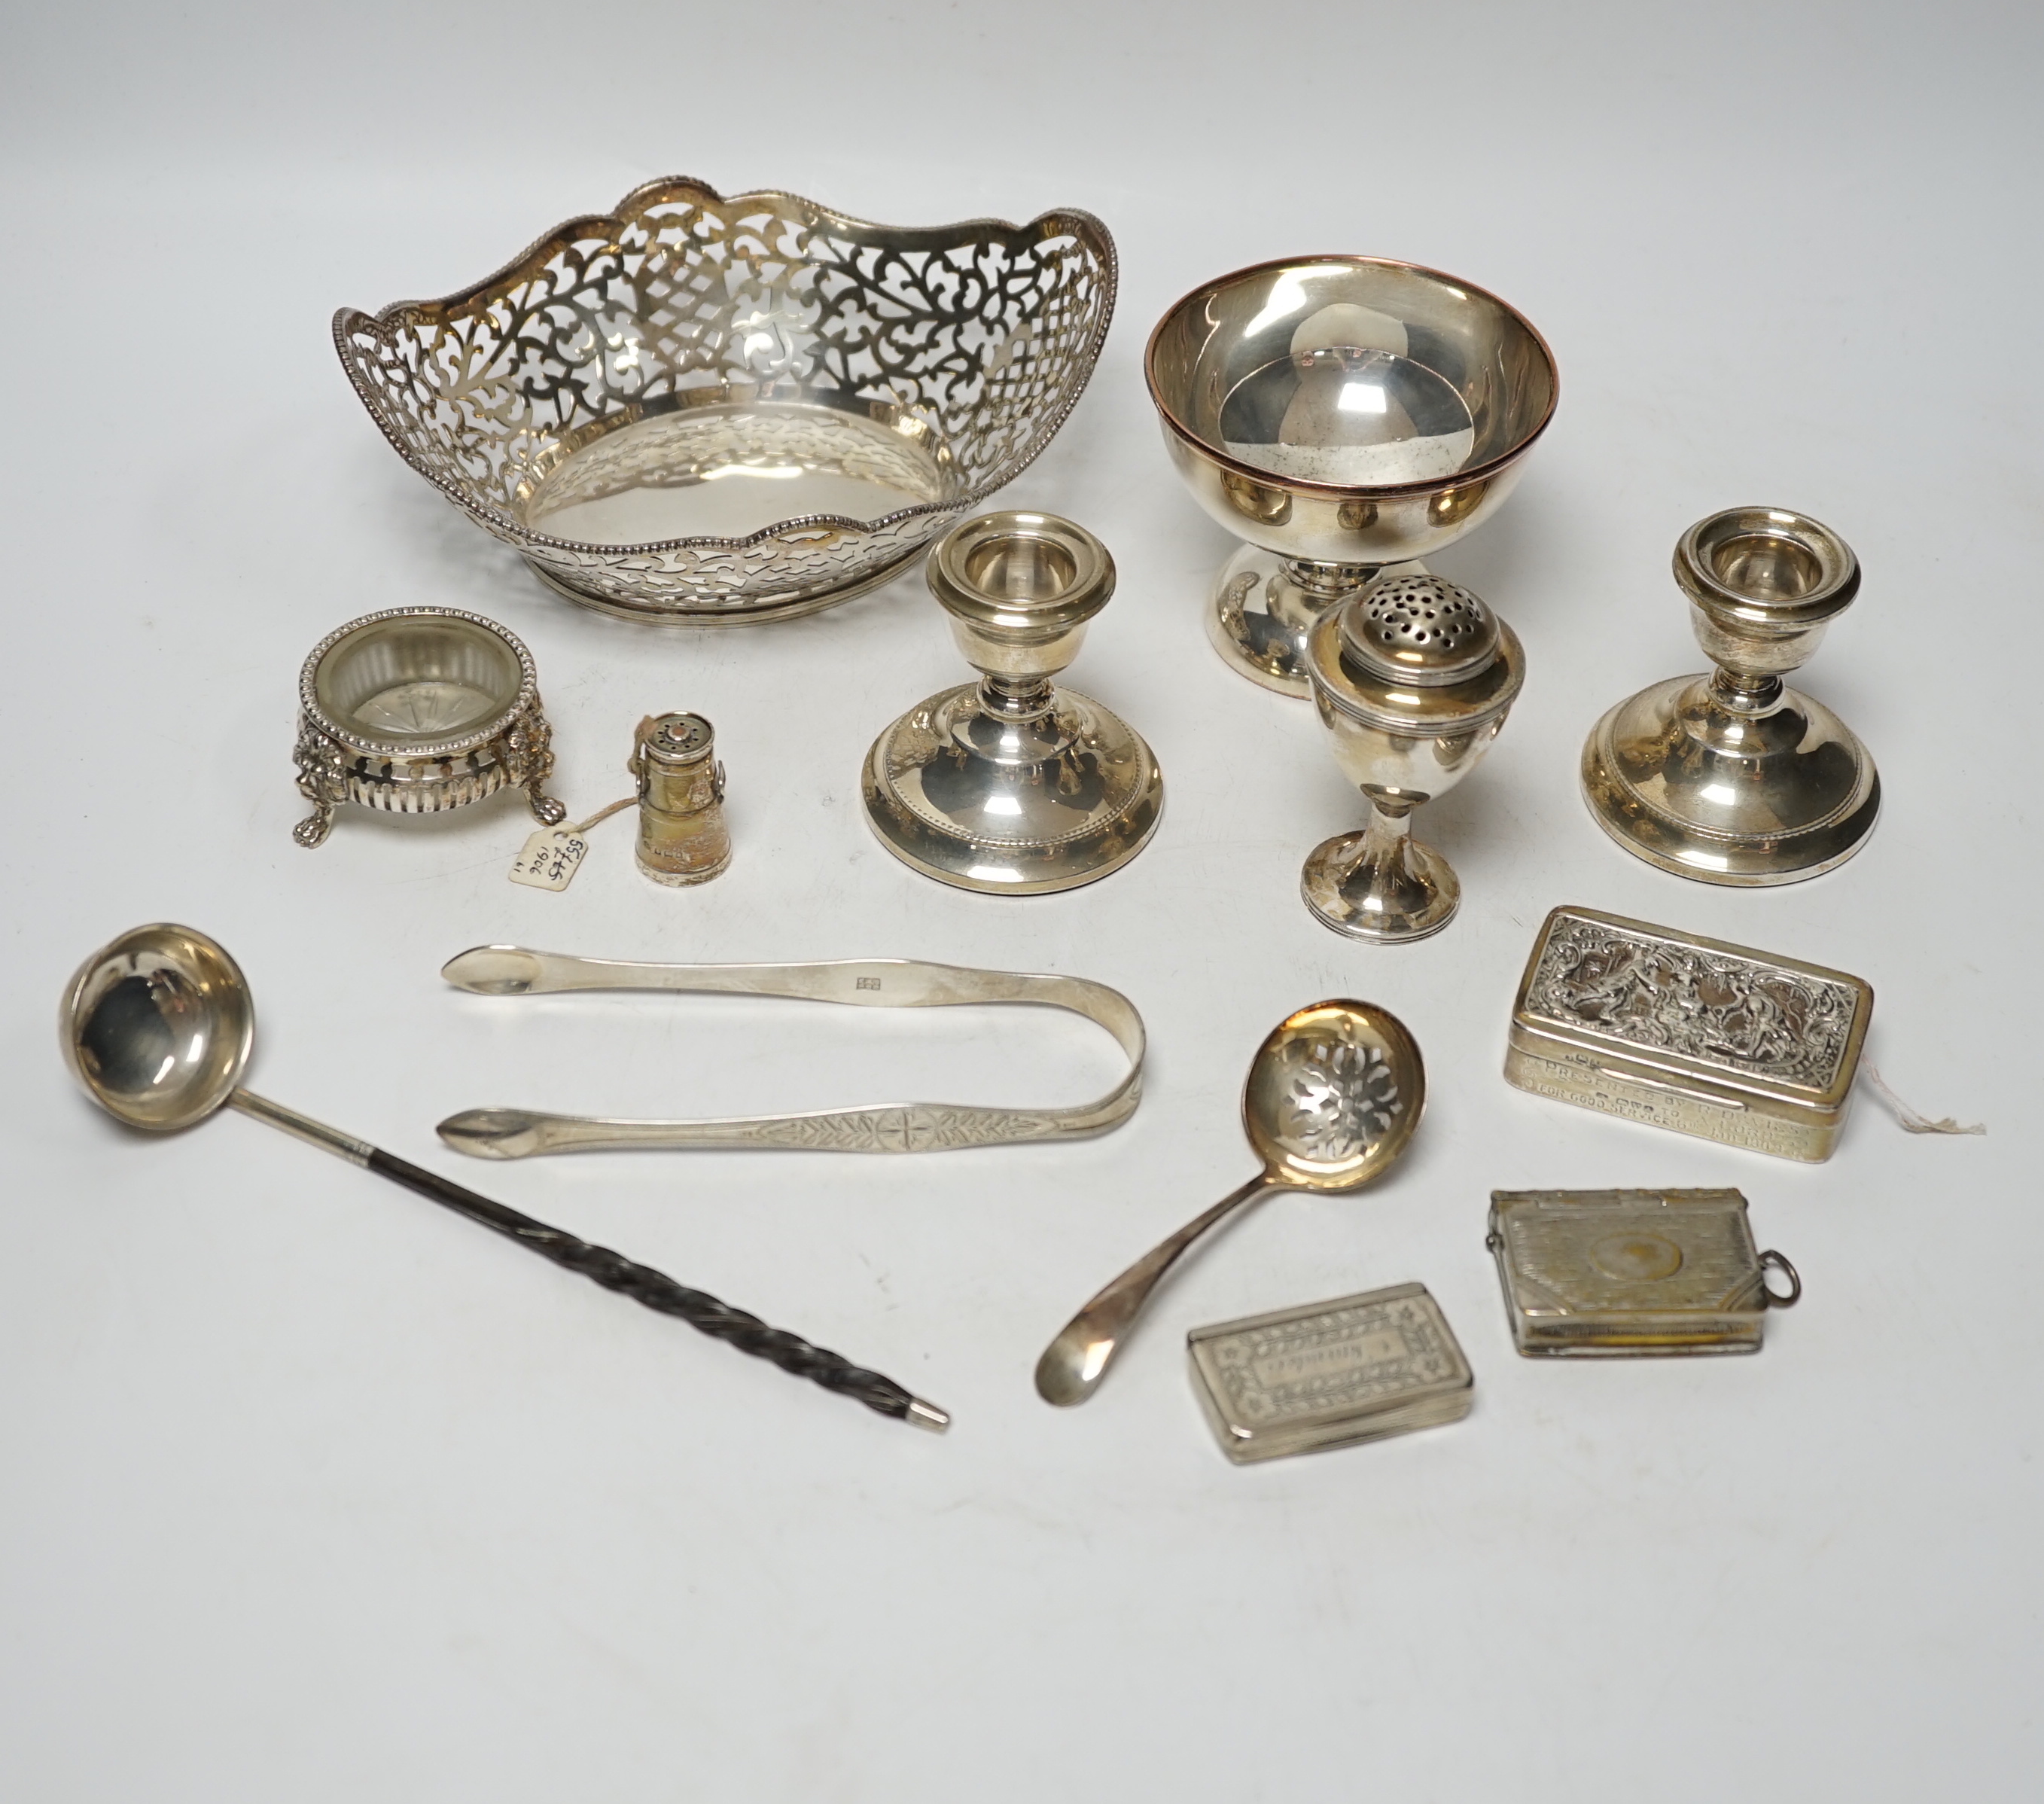 A small quantity of silver items to include a presentation snuff box, Chester, 1901, 69mm, vesta cases, condiments including 'milk churn' pepperette, George III vase shaped pepperette, ring box modelled as a coal scuttle